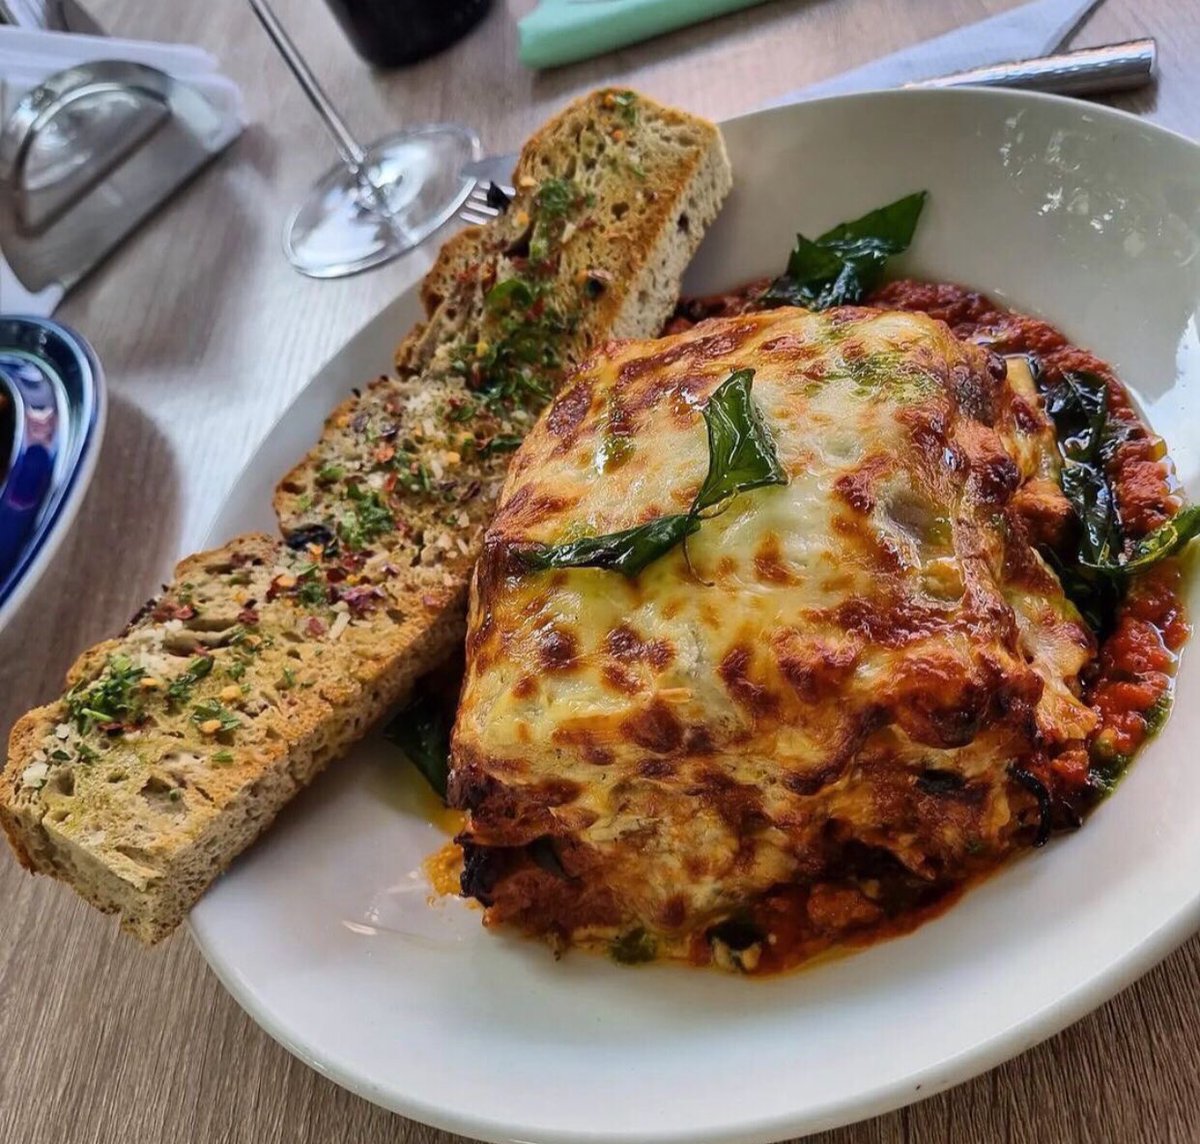 Day 191, On my Timeless Dream to become @davido private chef 30BG 👨‍🍳⏳

Dish: lasagna bolognese accompanied with garlic bread, garnish with fried basil 🌿 

Kindly retweet my Hustle&Dream 🙏🏿
@Prince_II @Folazfab ❤️❤️